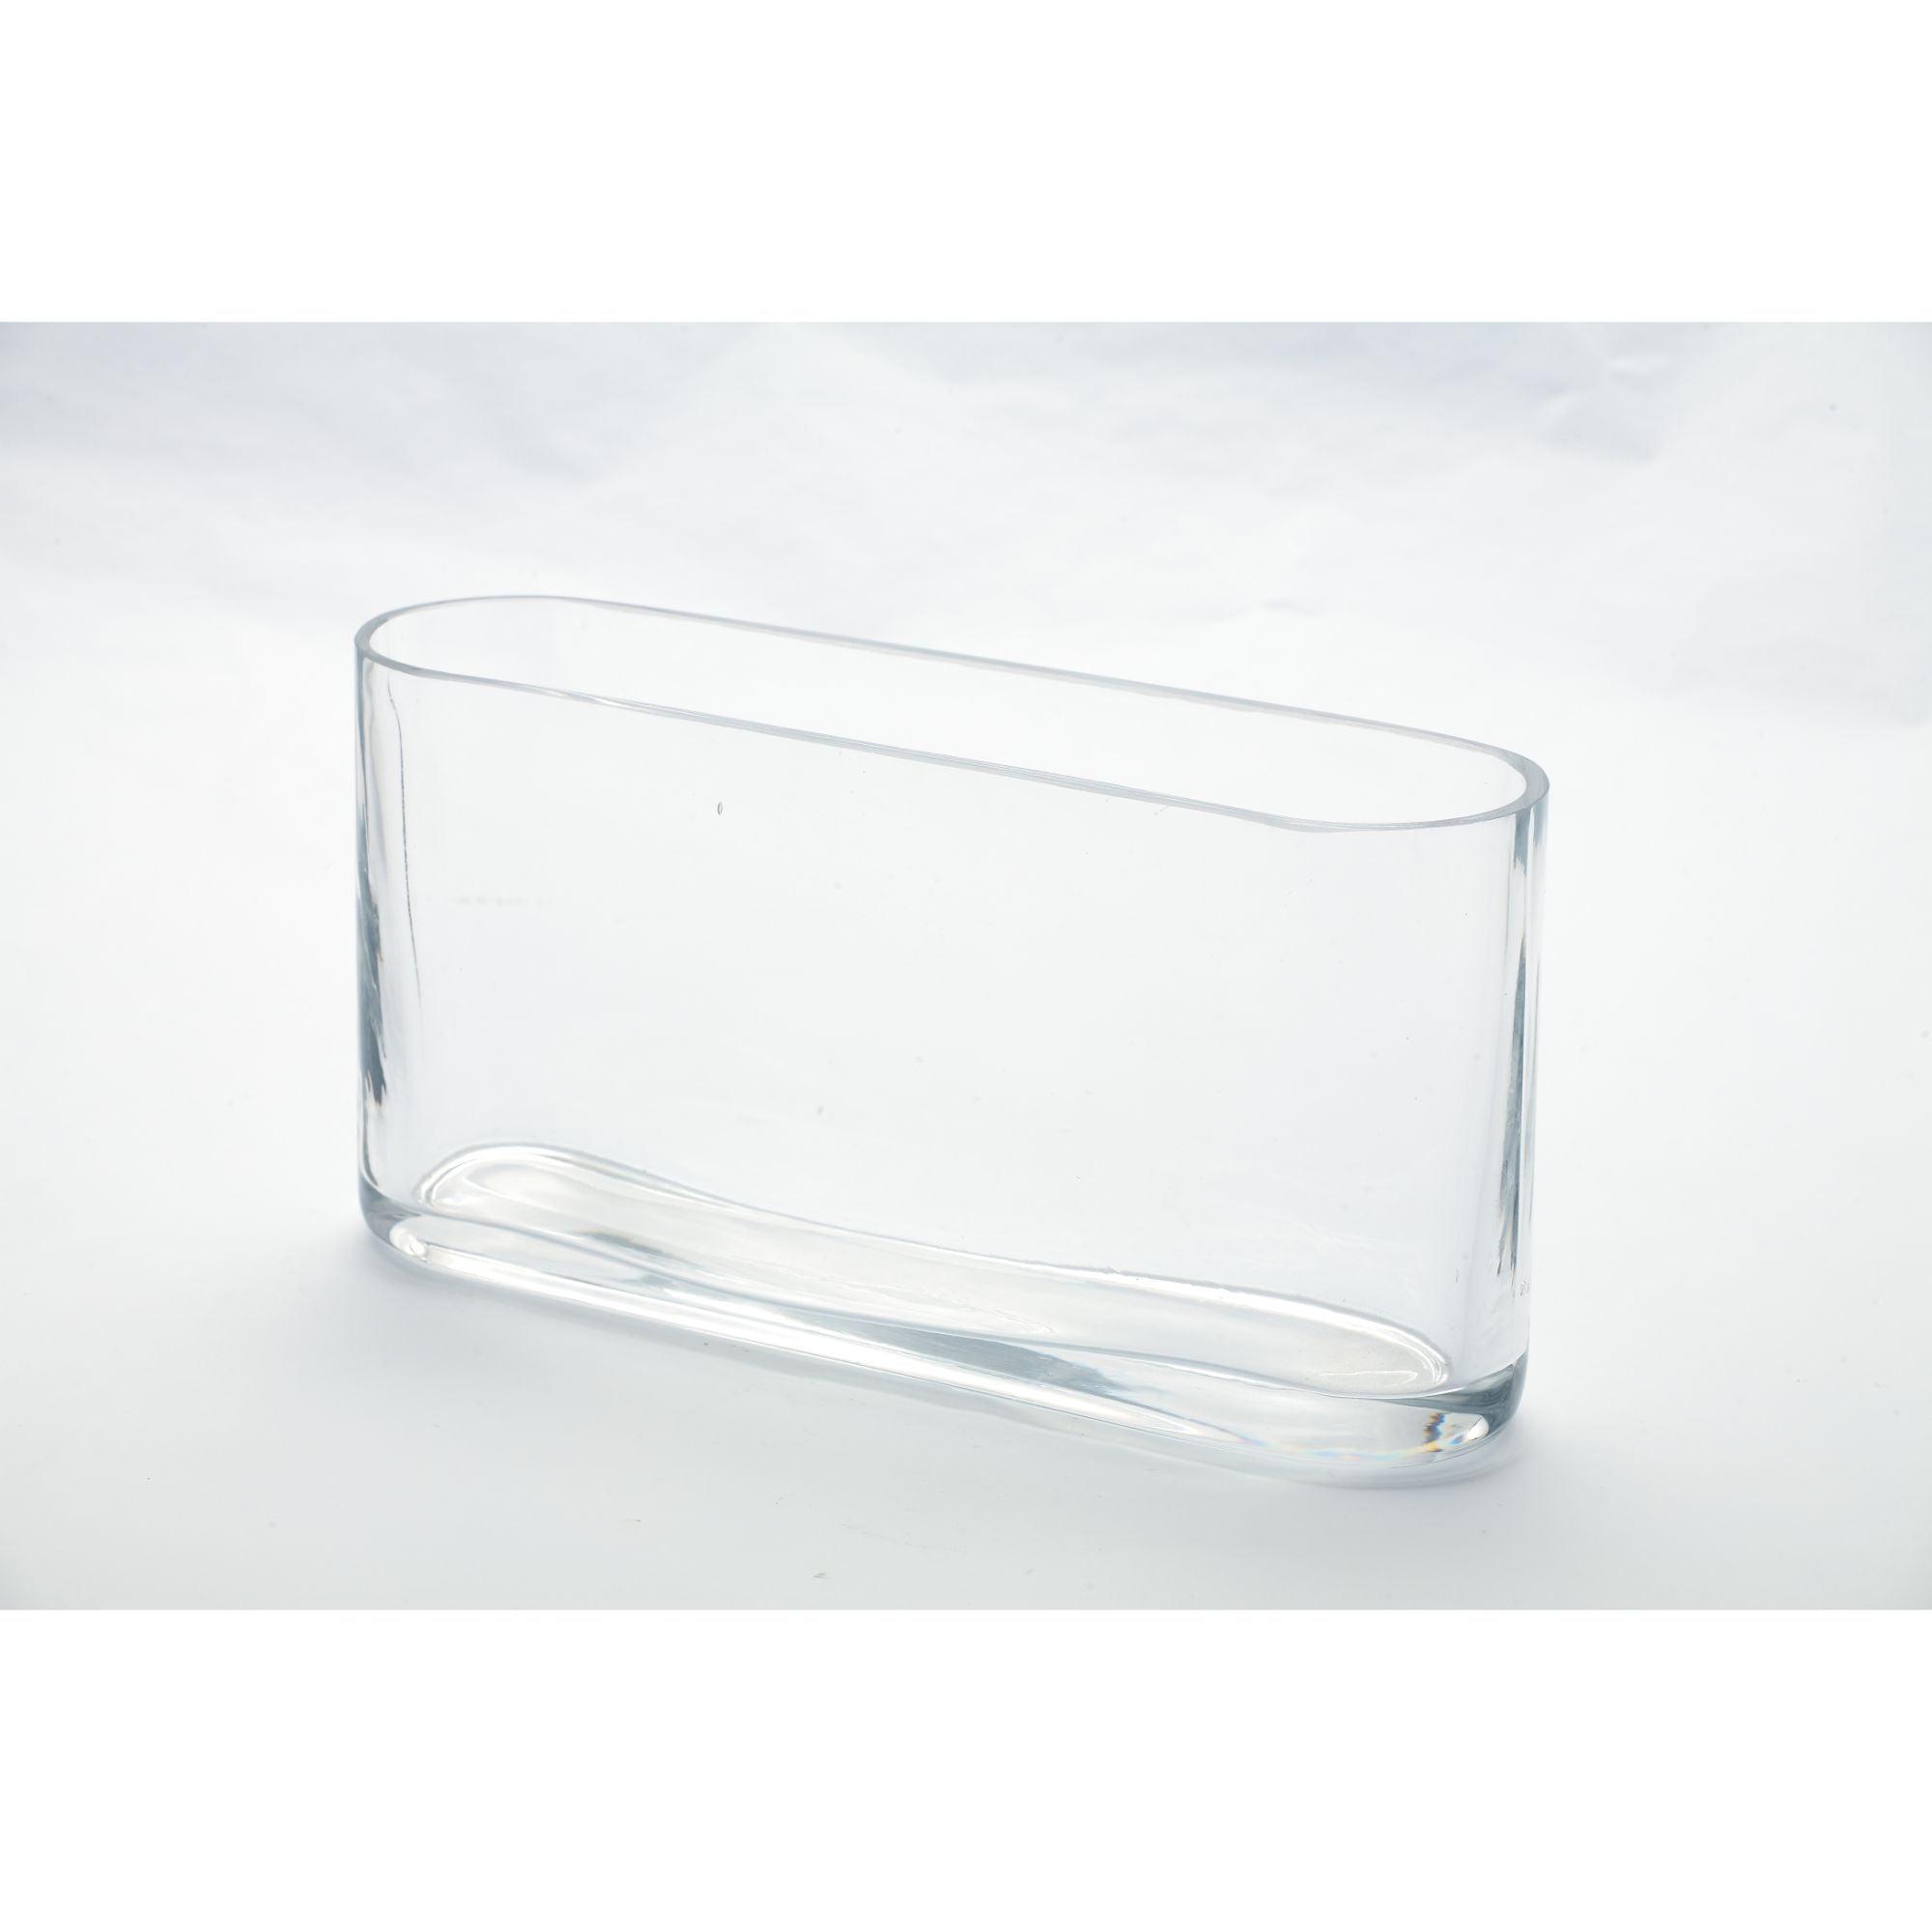 Elegant Oval Glass Vase for Fresh Bouquets and Decor